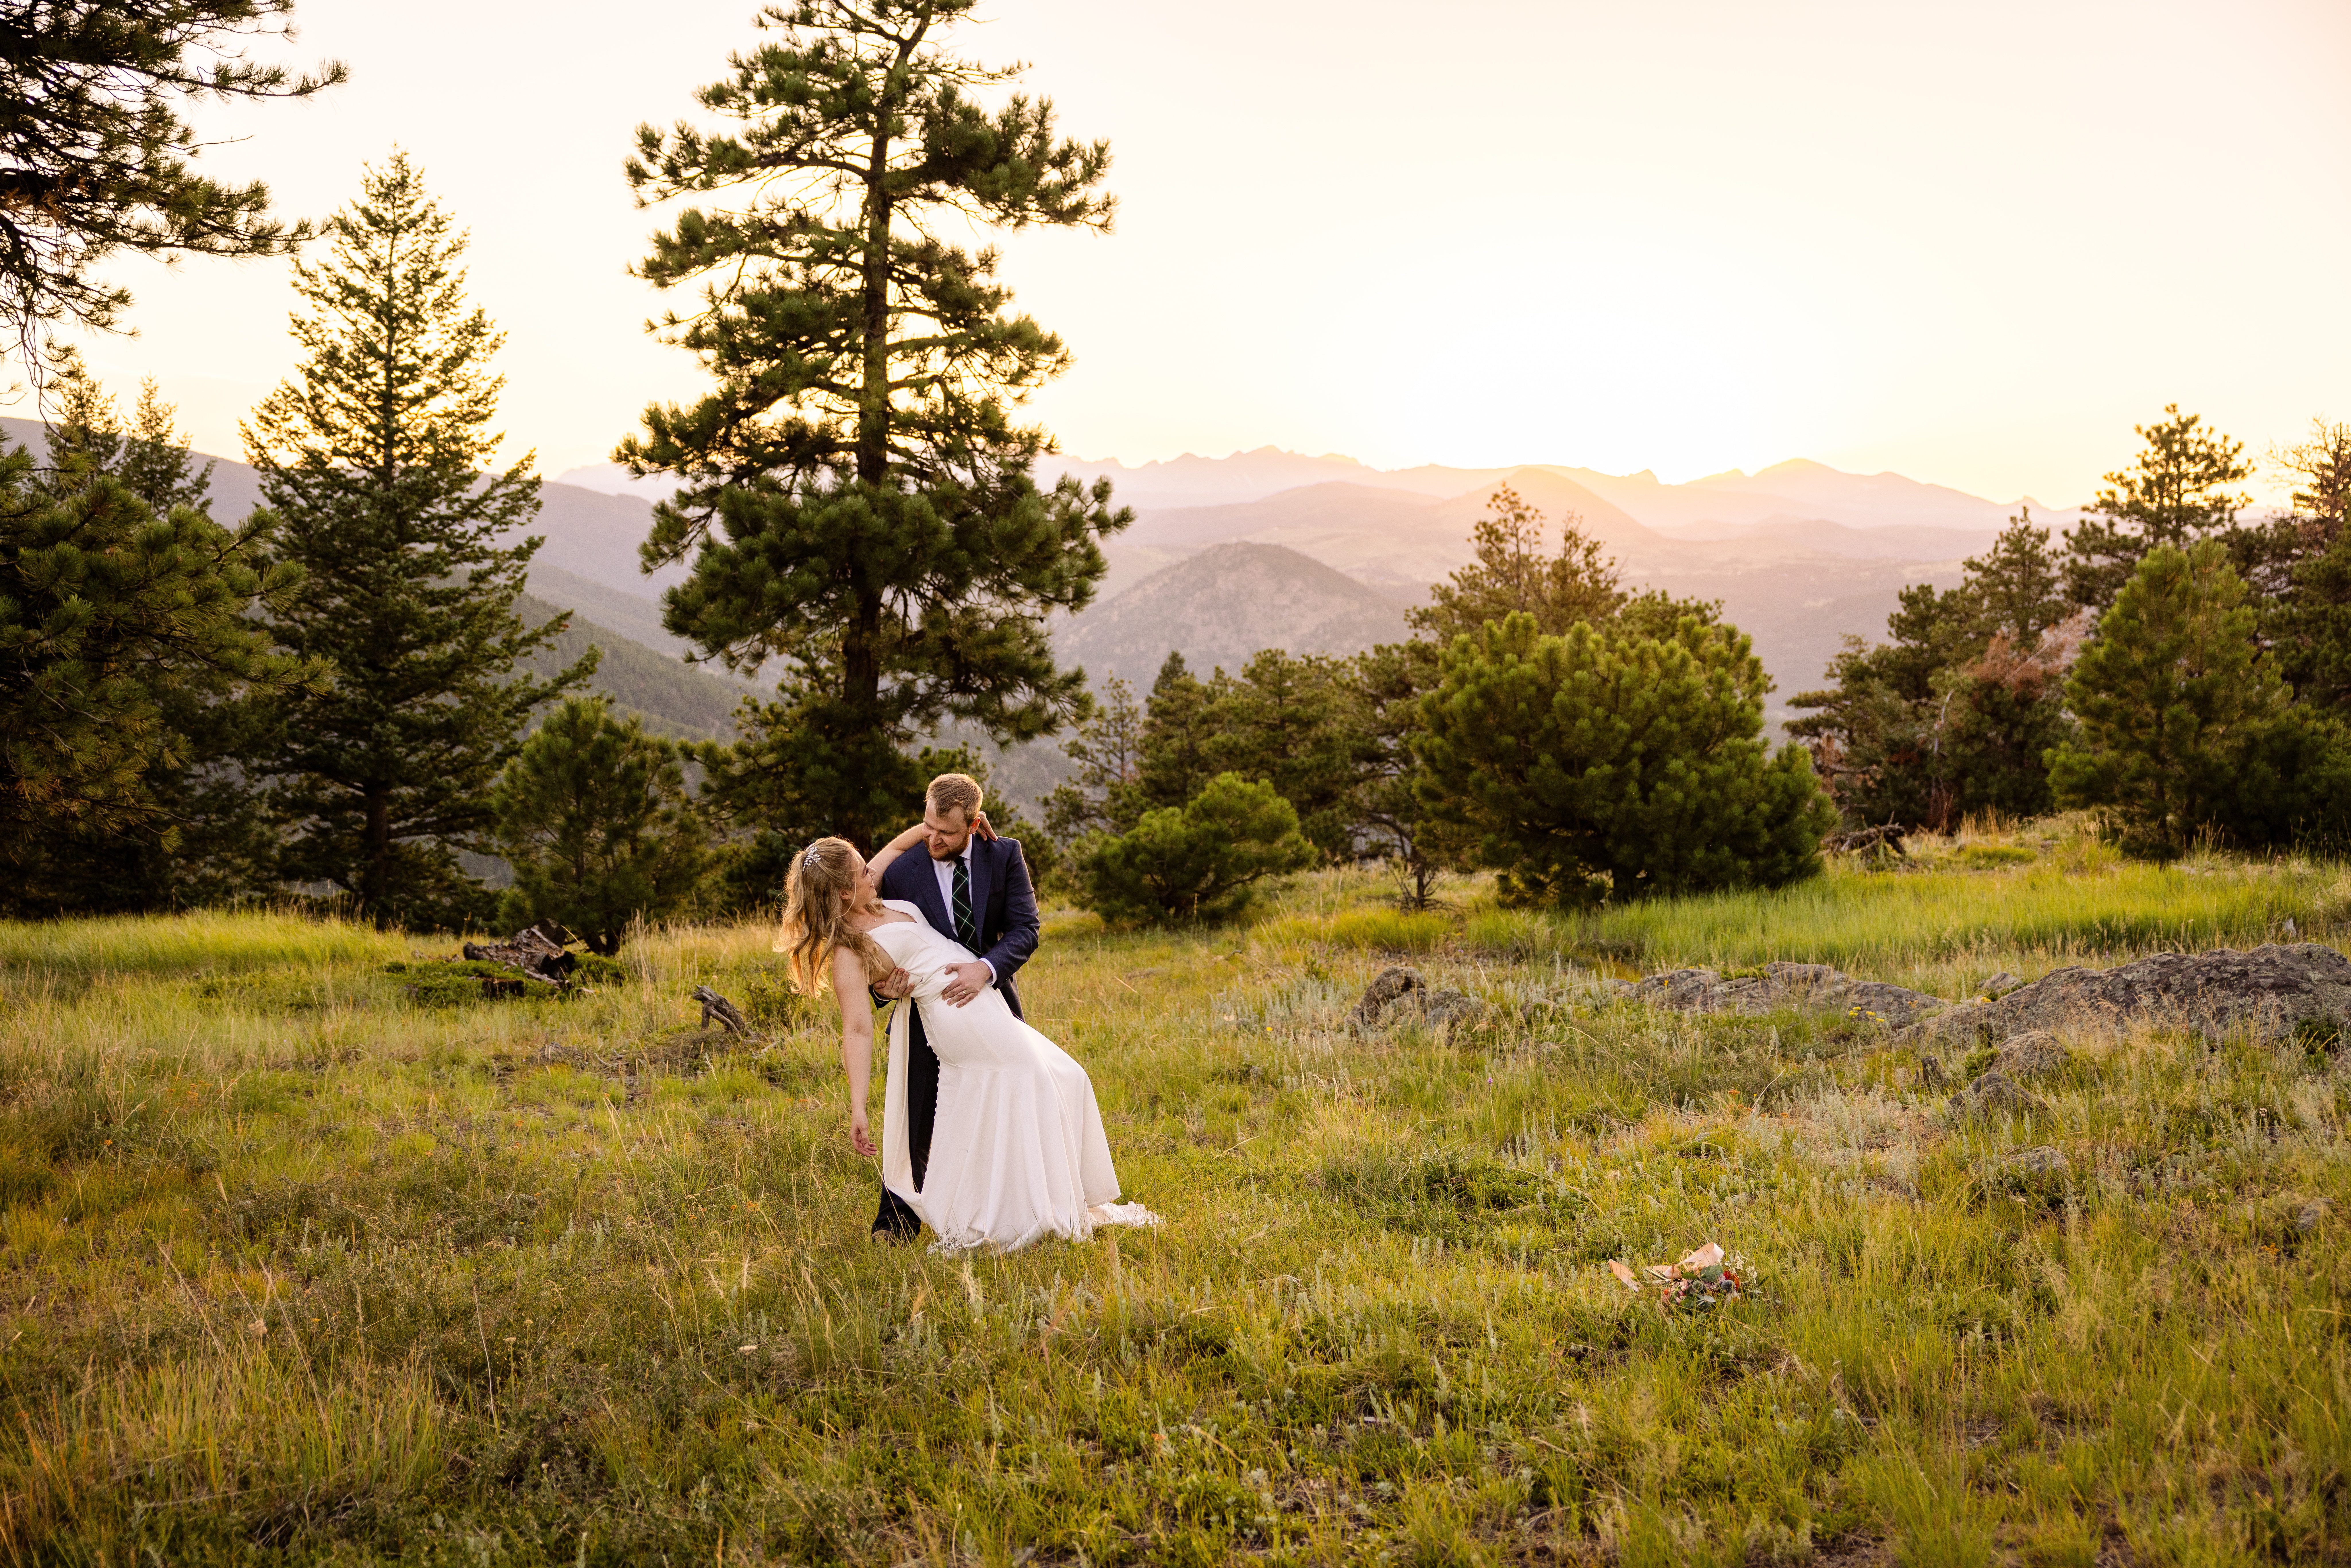 The bride and groom share a first dance at sunset after their Sunrise Amphitheater wedding.